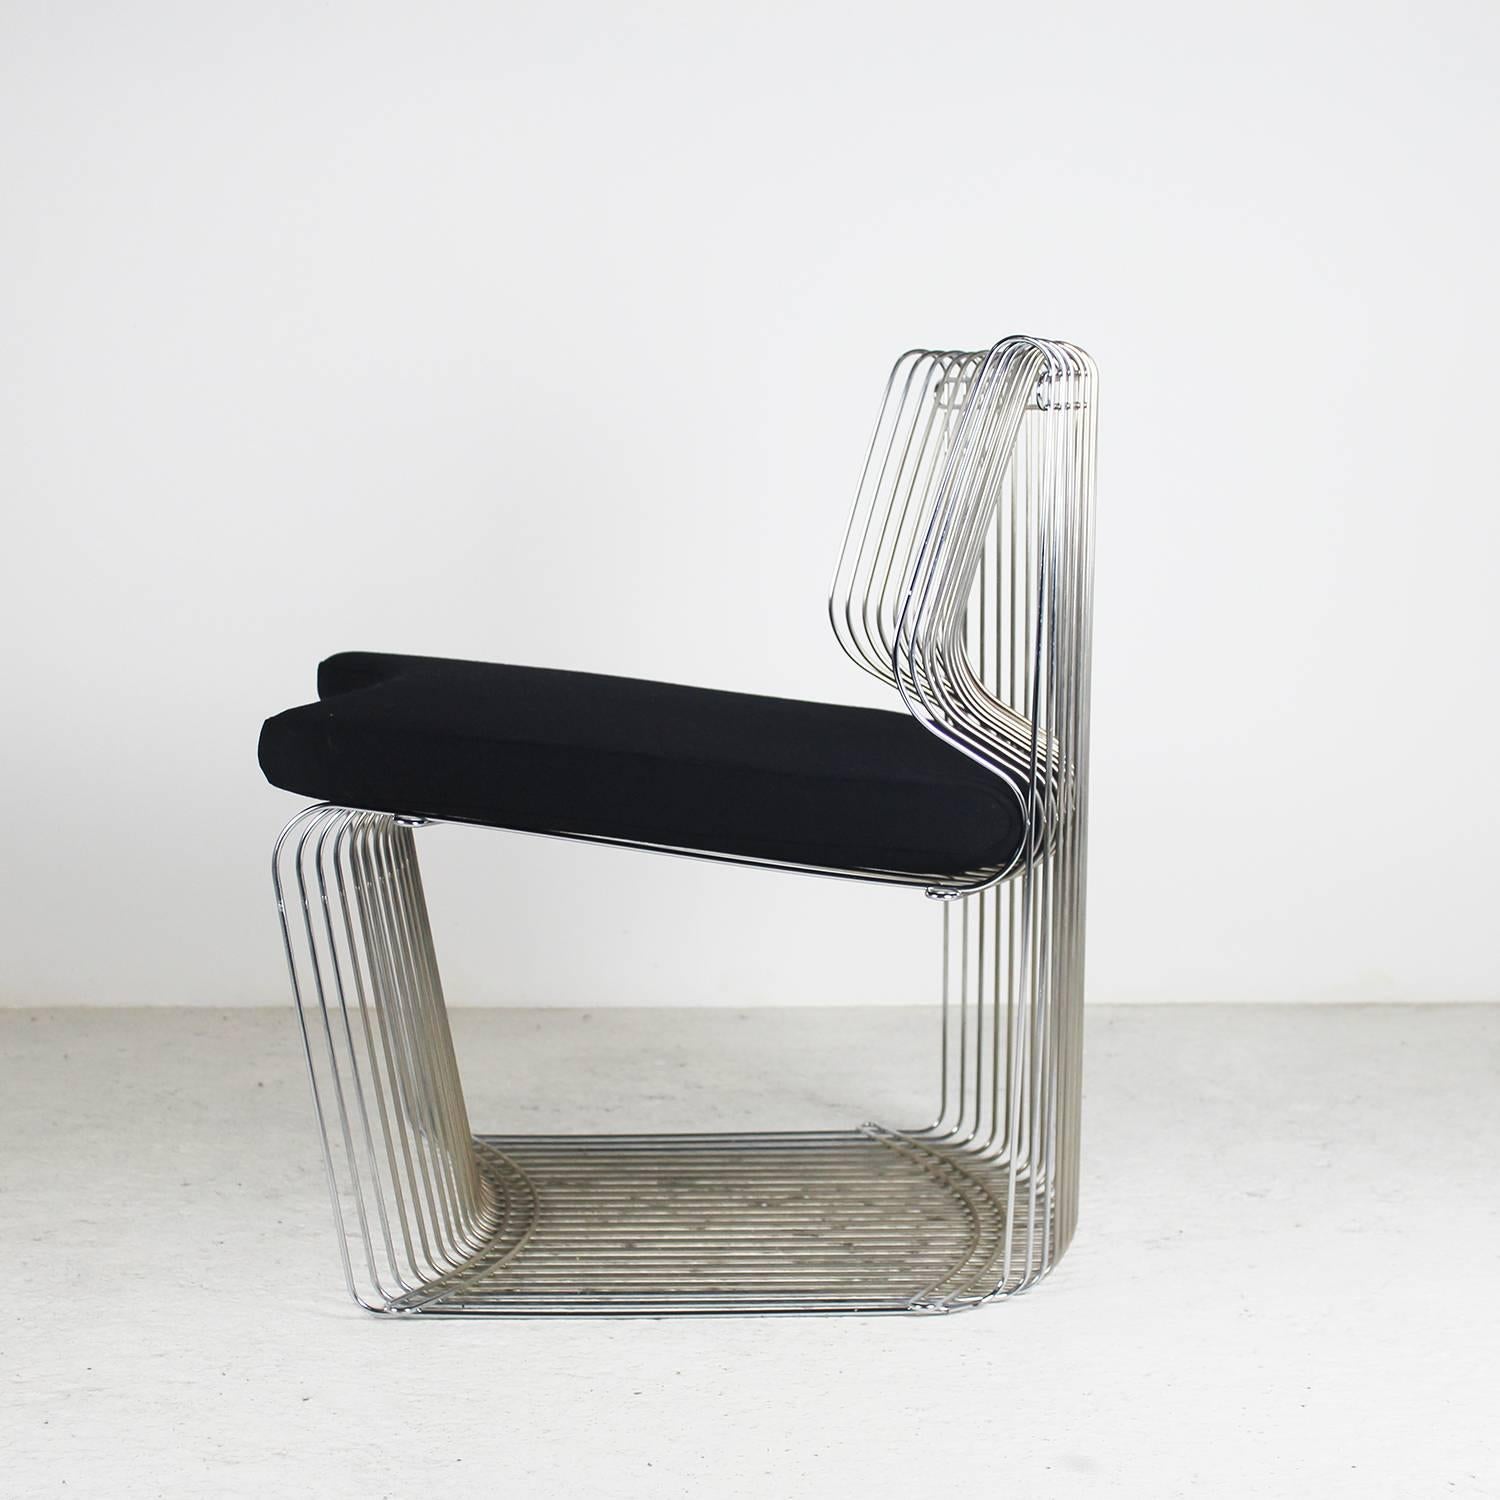 A 1970s pair of lounge chairs by the famous designer Verner Panton in chromed metal and a cushion in black fabric.